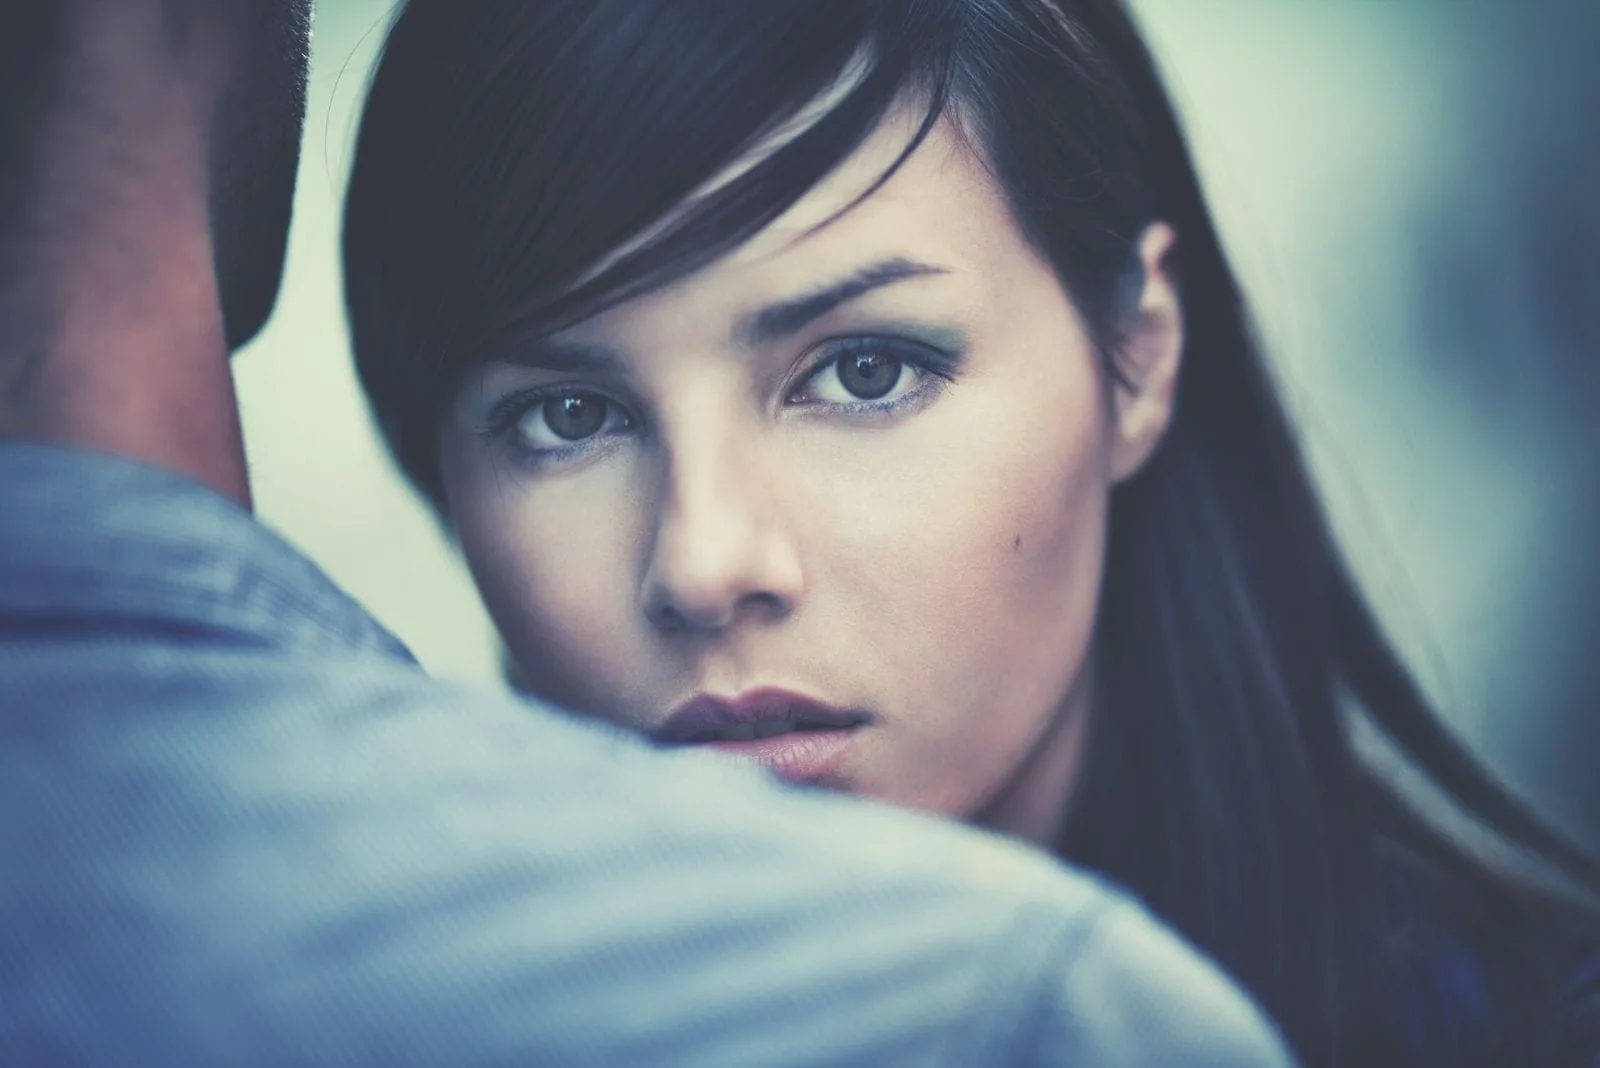 young pensive woman staring at the camera over a man's shoulder